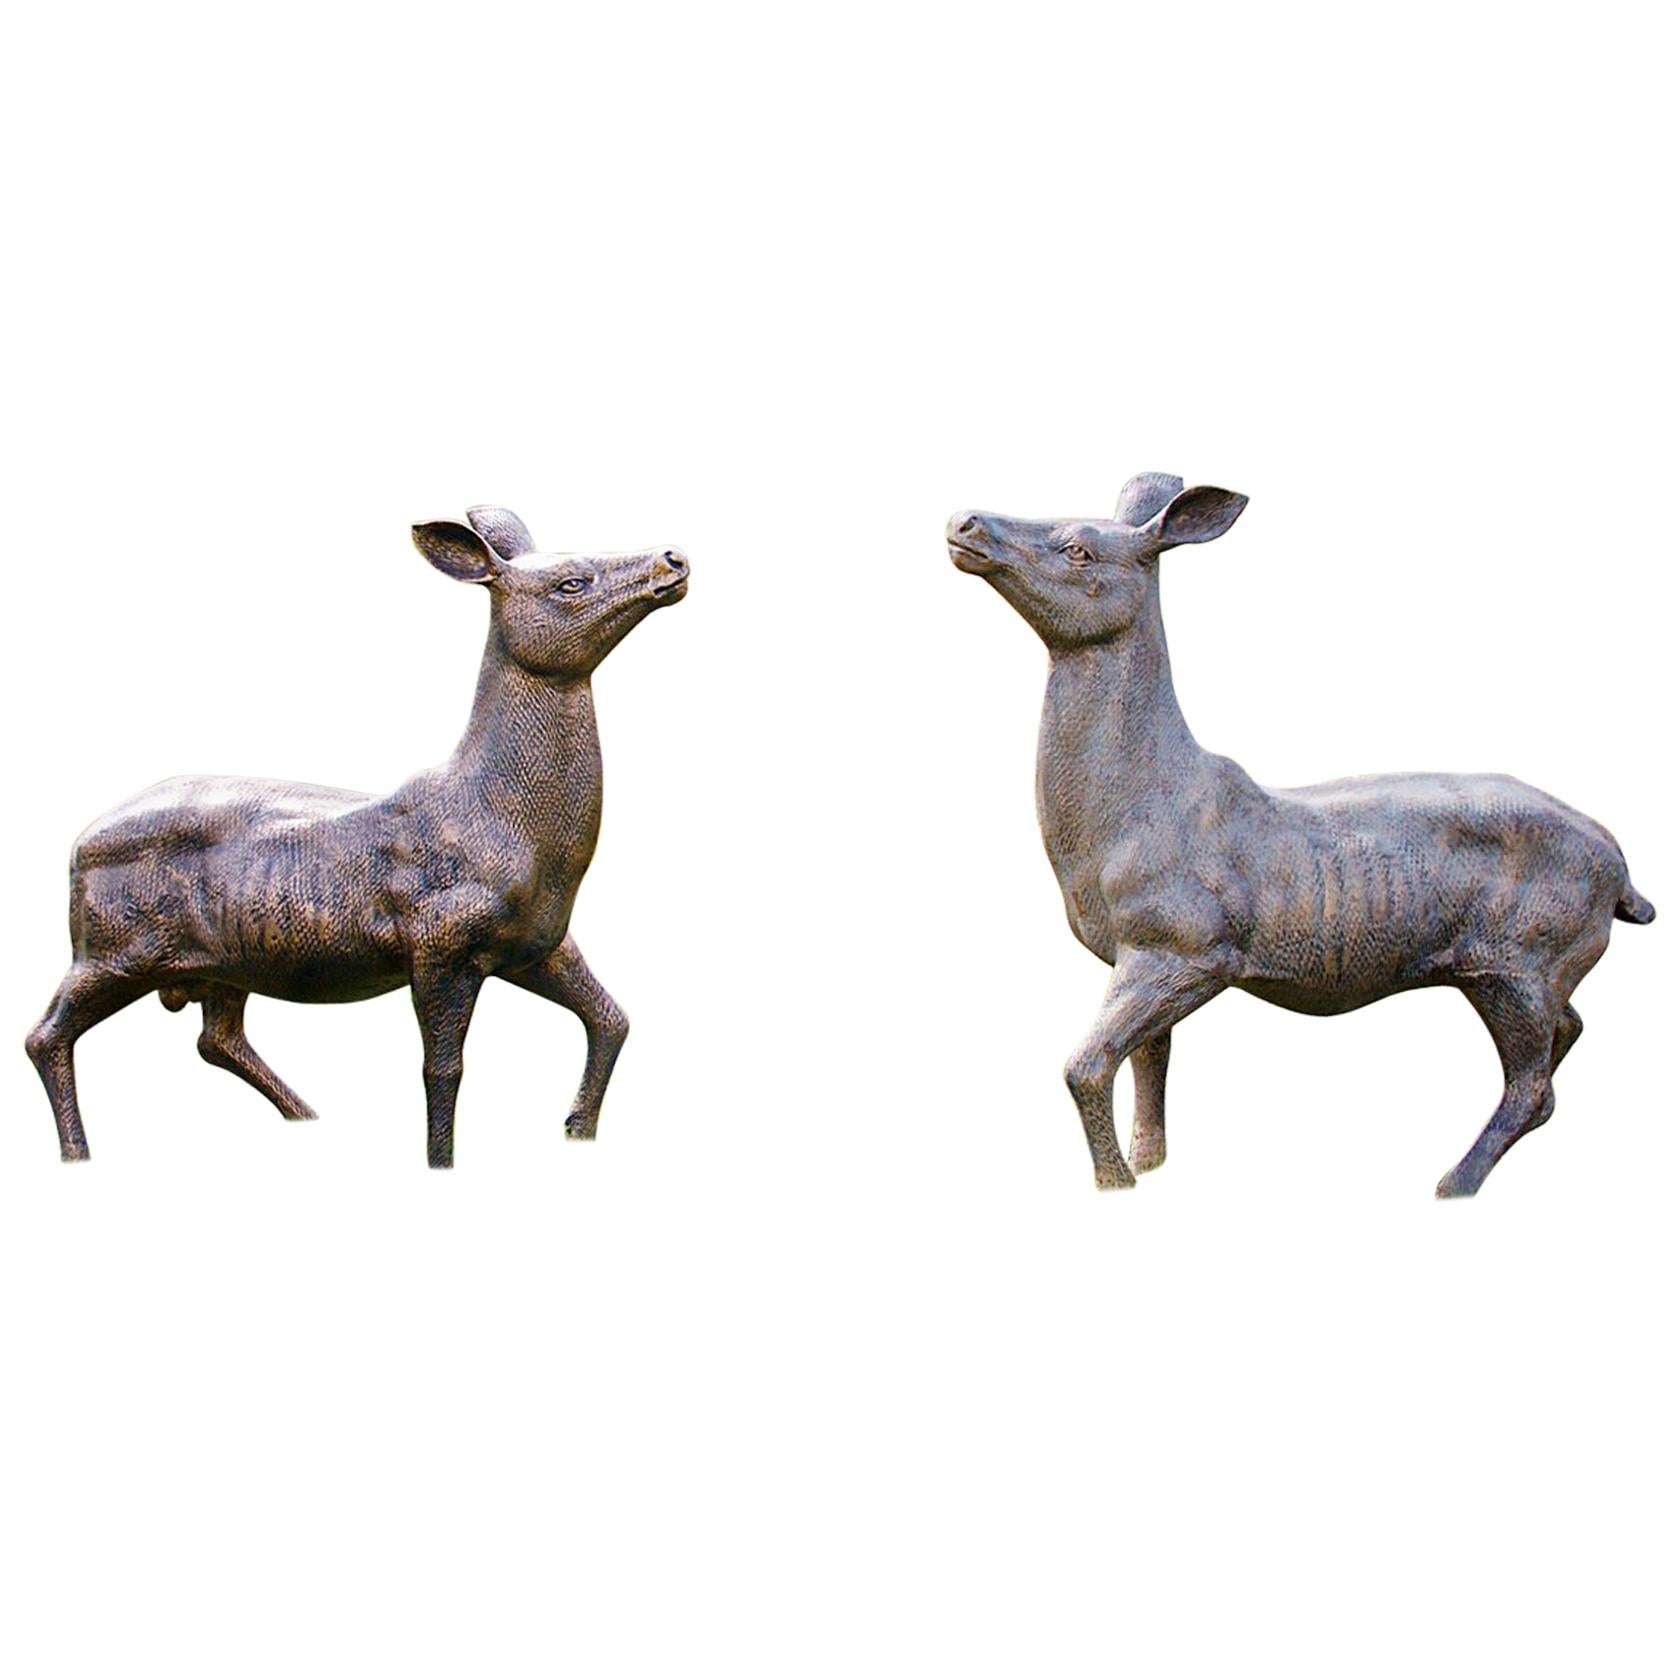 Pair of Cast Iron Deer, Beautifully Modeled in the 18th Century Style